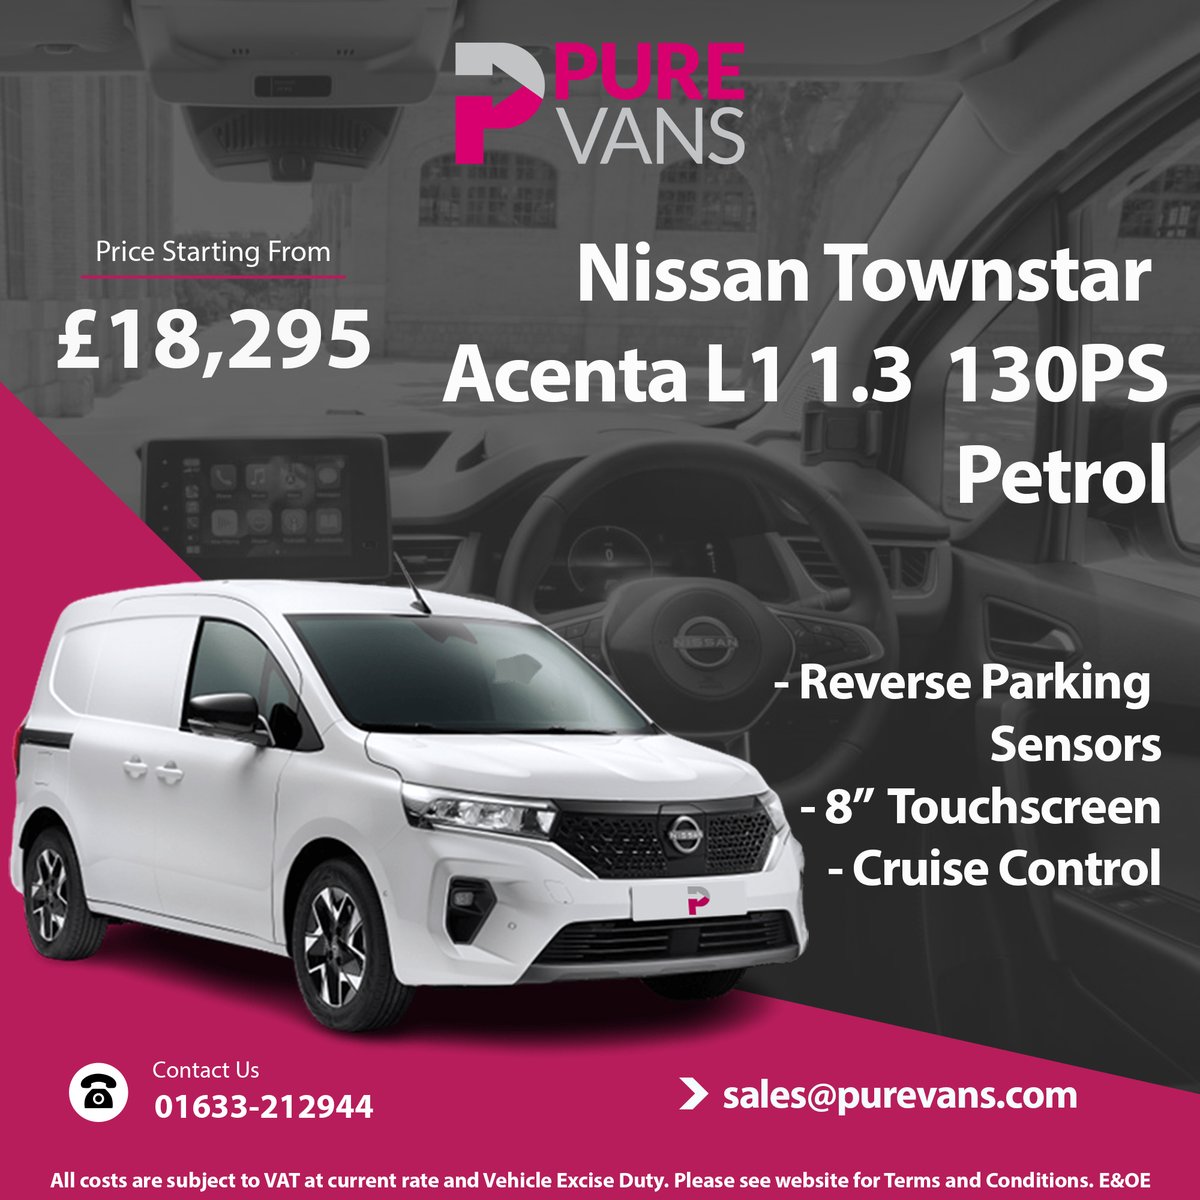 If you're looking for a van to be delivered to you ASAP, free of charge, look no further than the Nissan Townstar Acenta! Check out our most recent blog post to see what we love about this van👉discountvansales.co.uk/blog/things-we… Don't miss out! #Nissan #Townstar #Acenta #PureVans 🚐👍